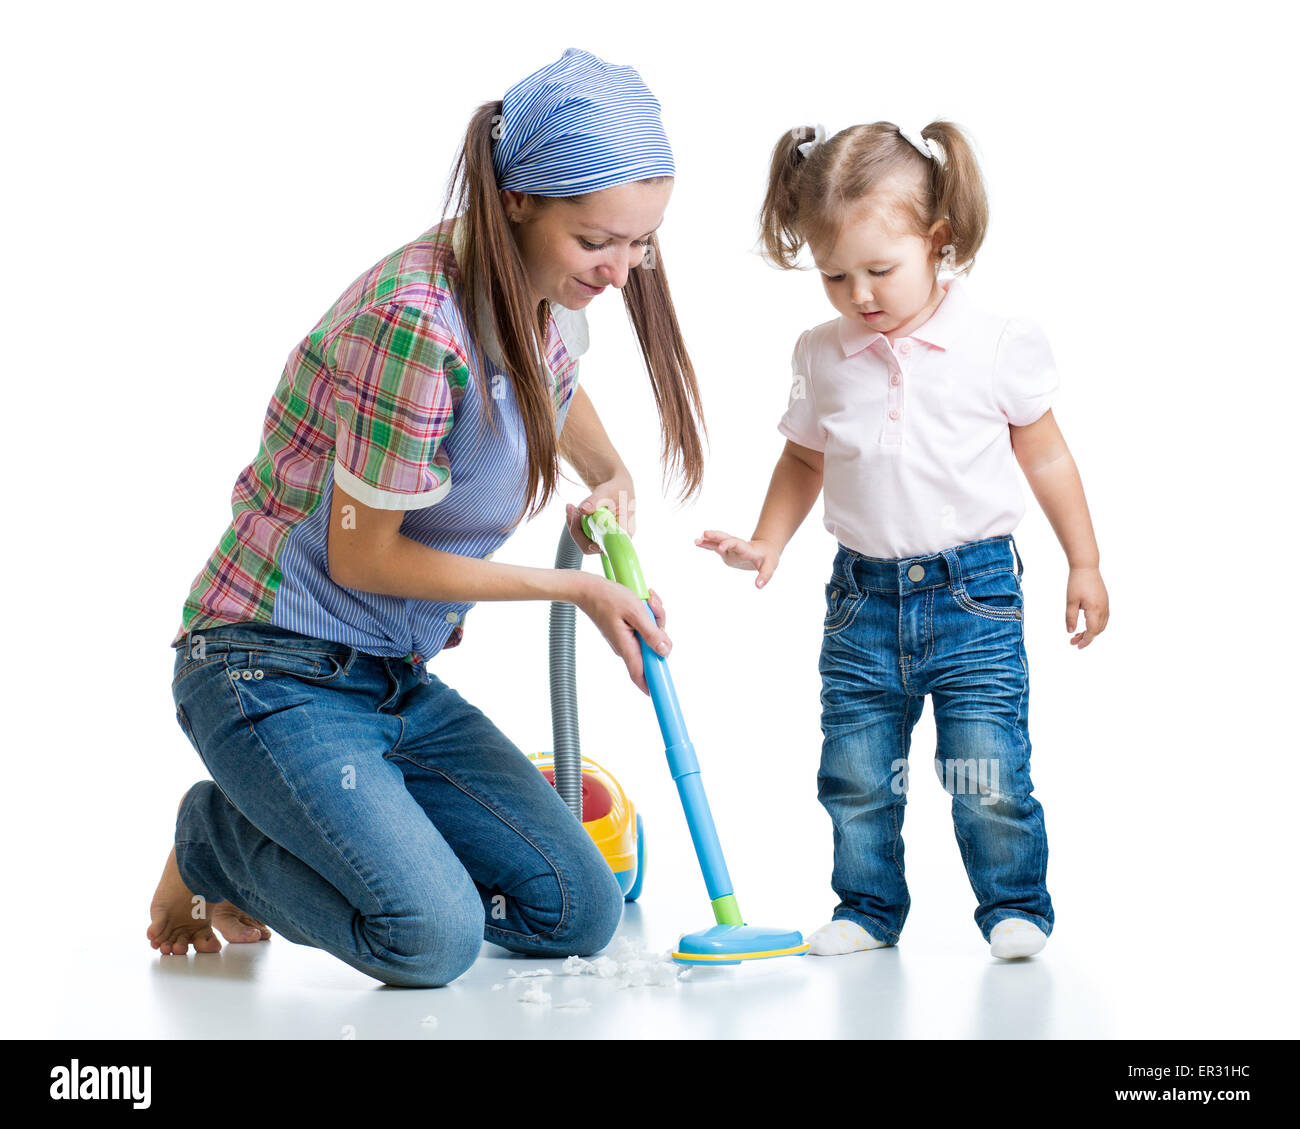 Child little girl and mom cleaning room isolated Stock Photo